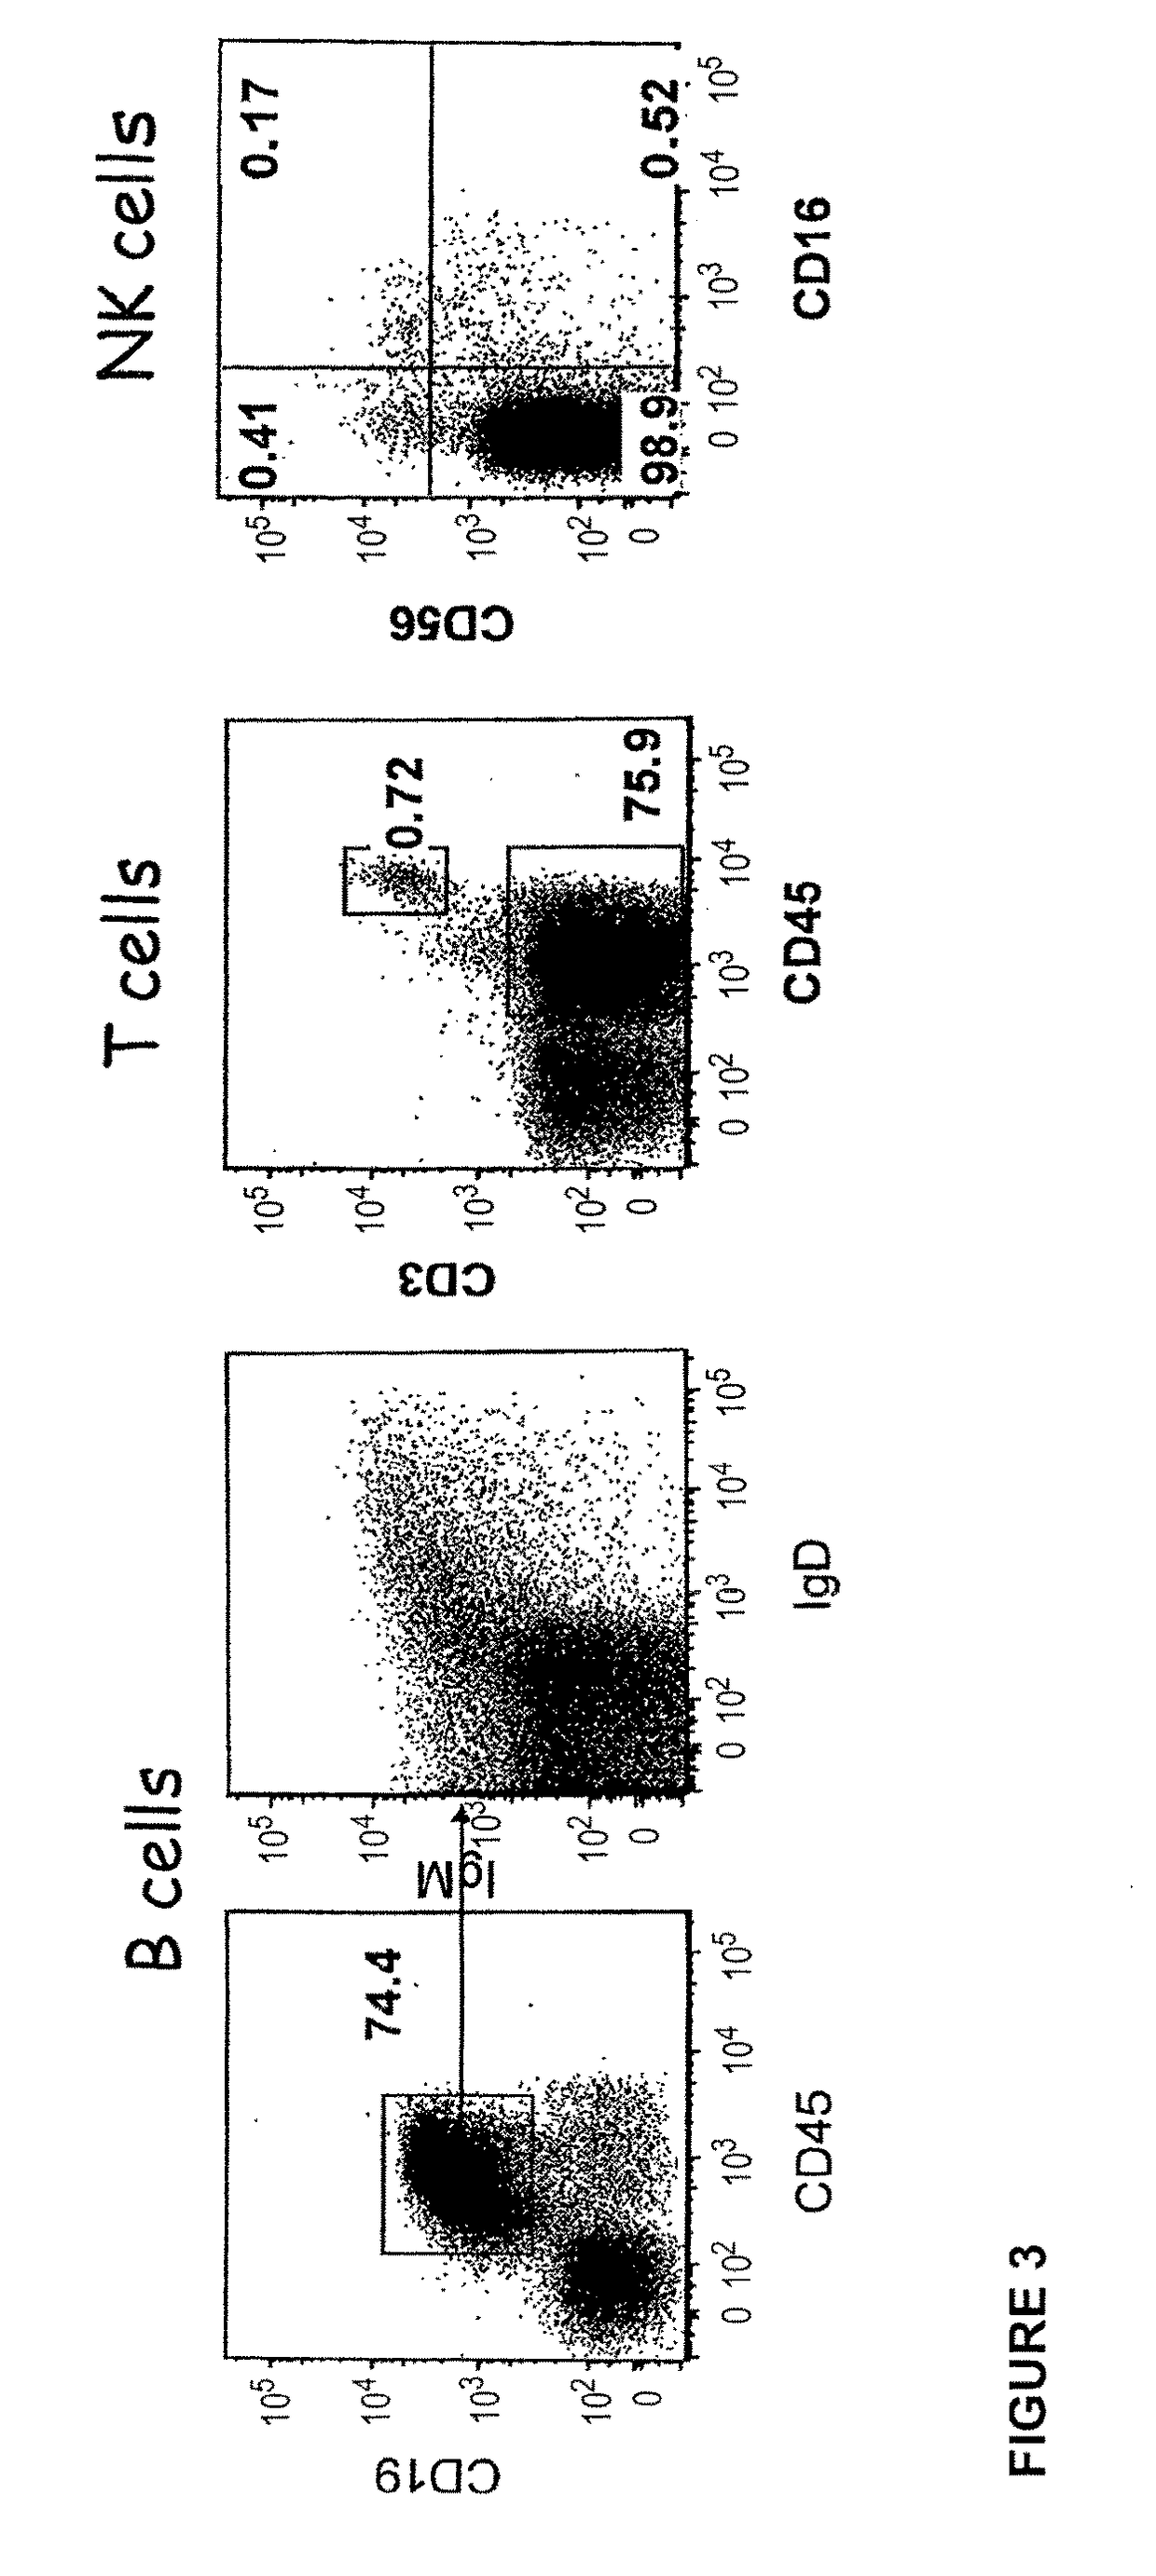 Transgenic immunodeficient mouse expressing human SIRP-alpha